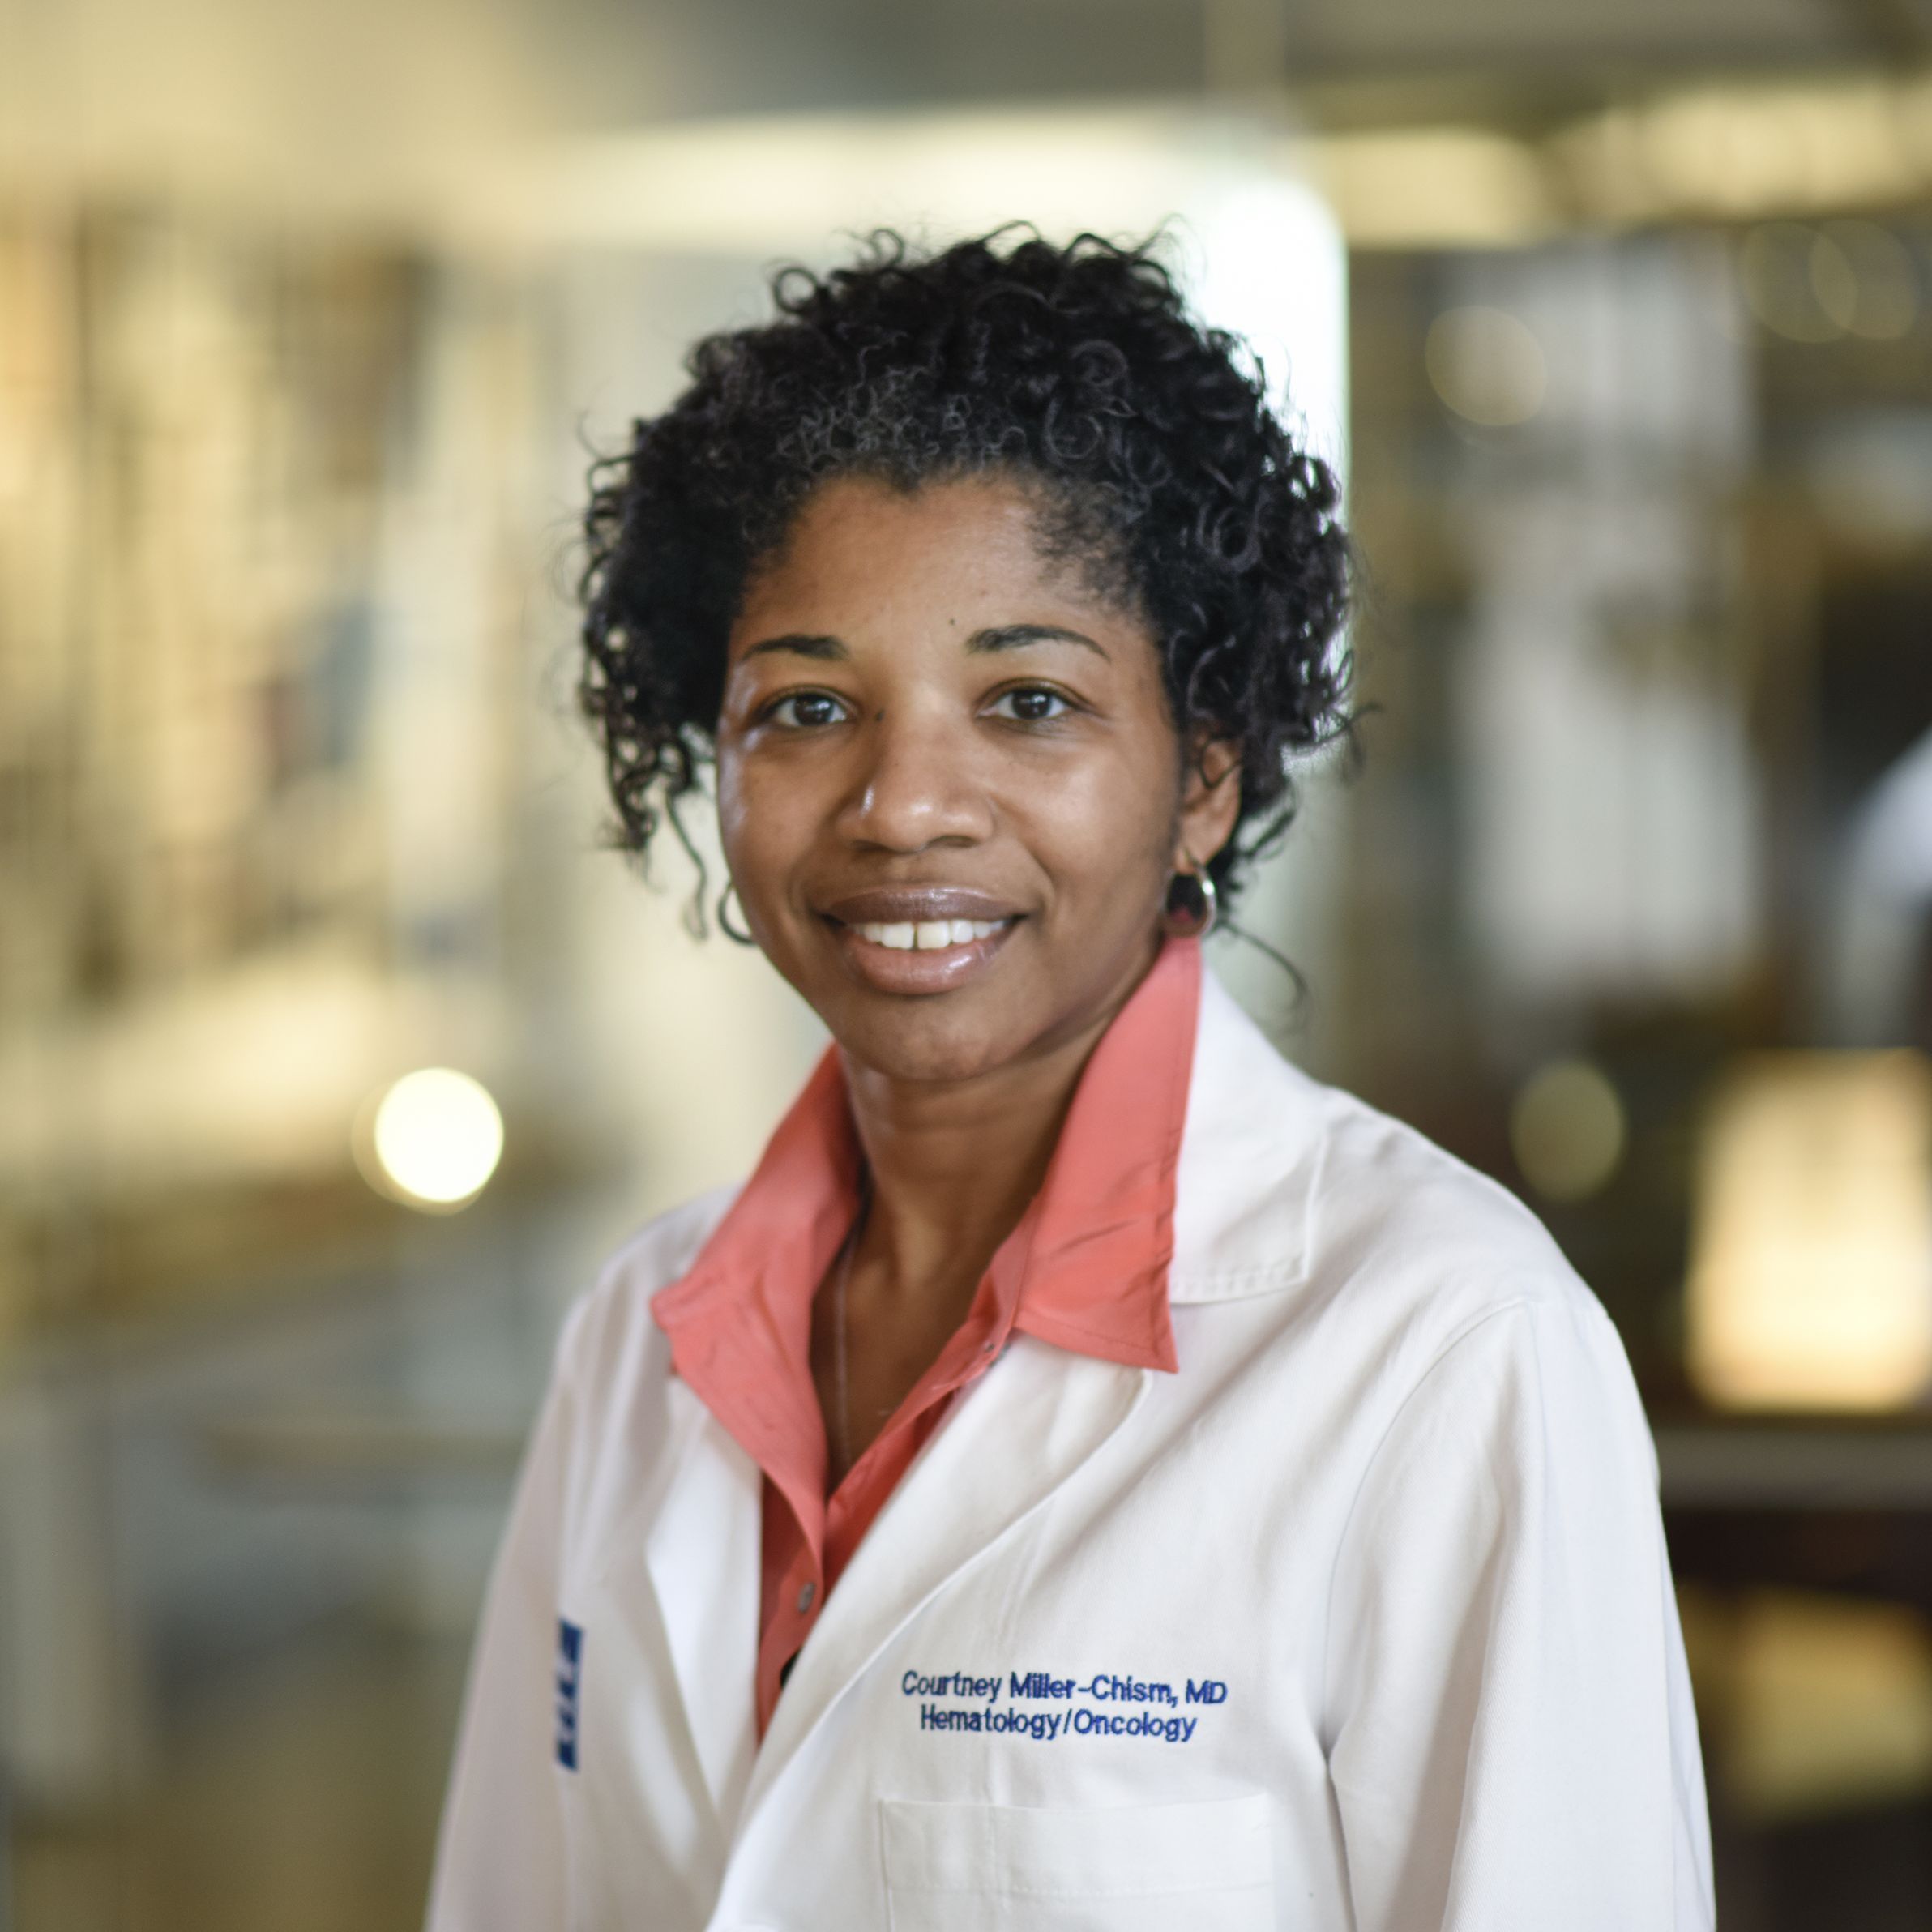 Courtney Nicole Miller-Chism, M.D.